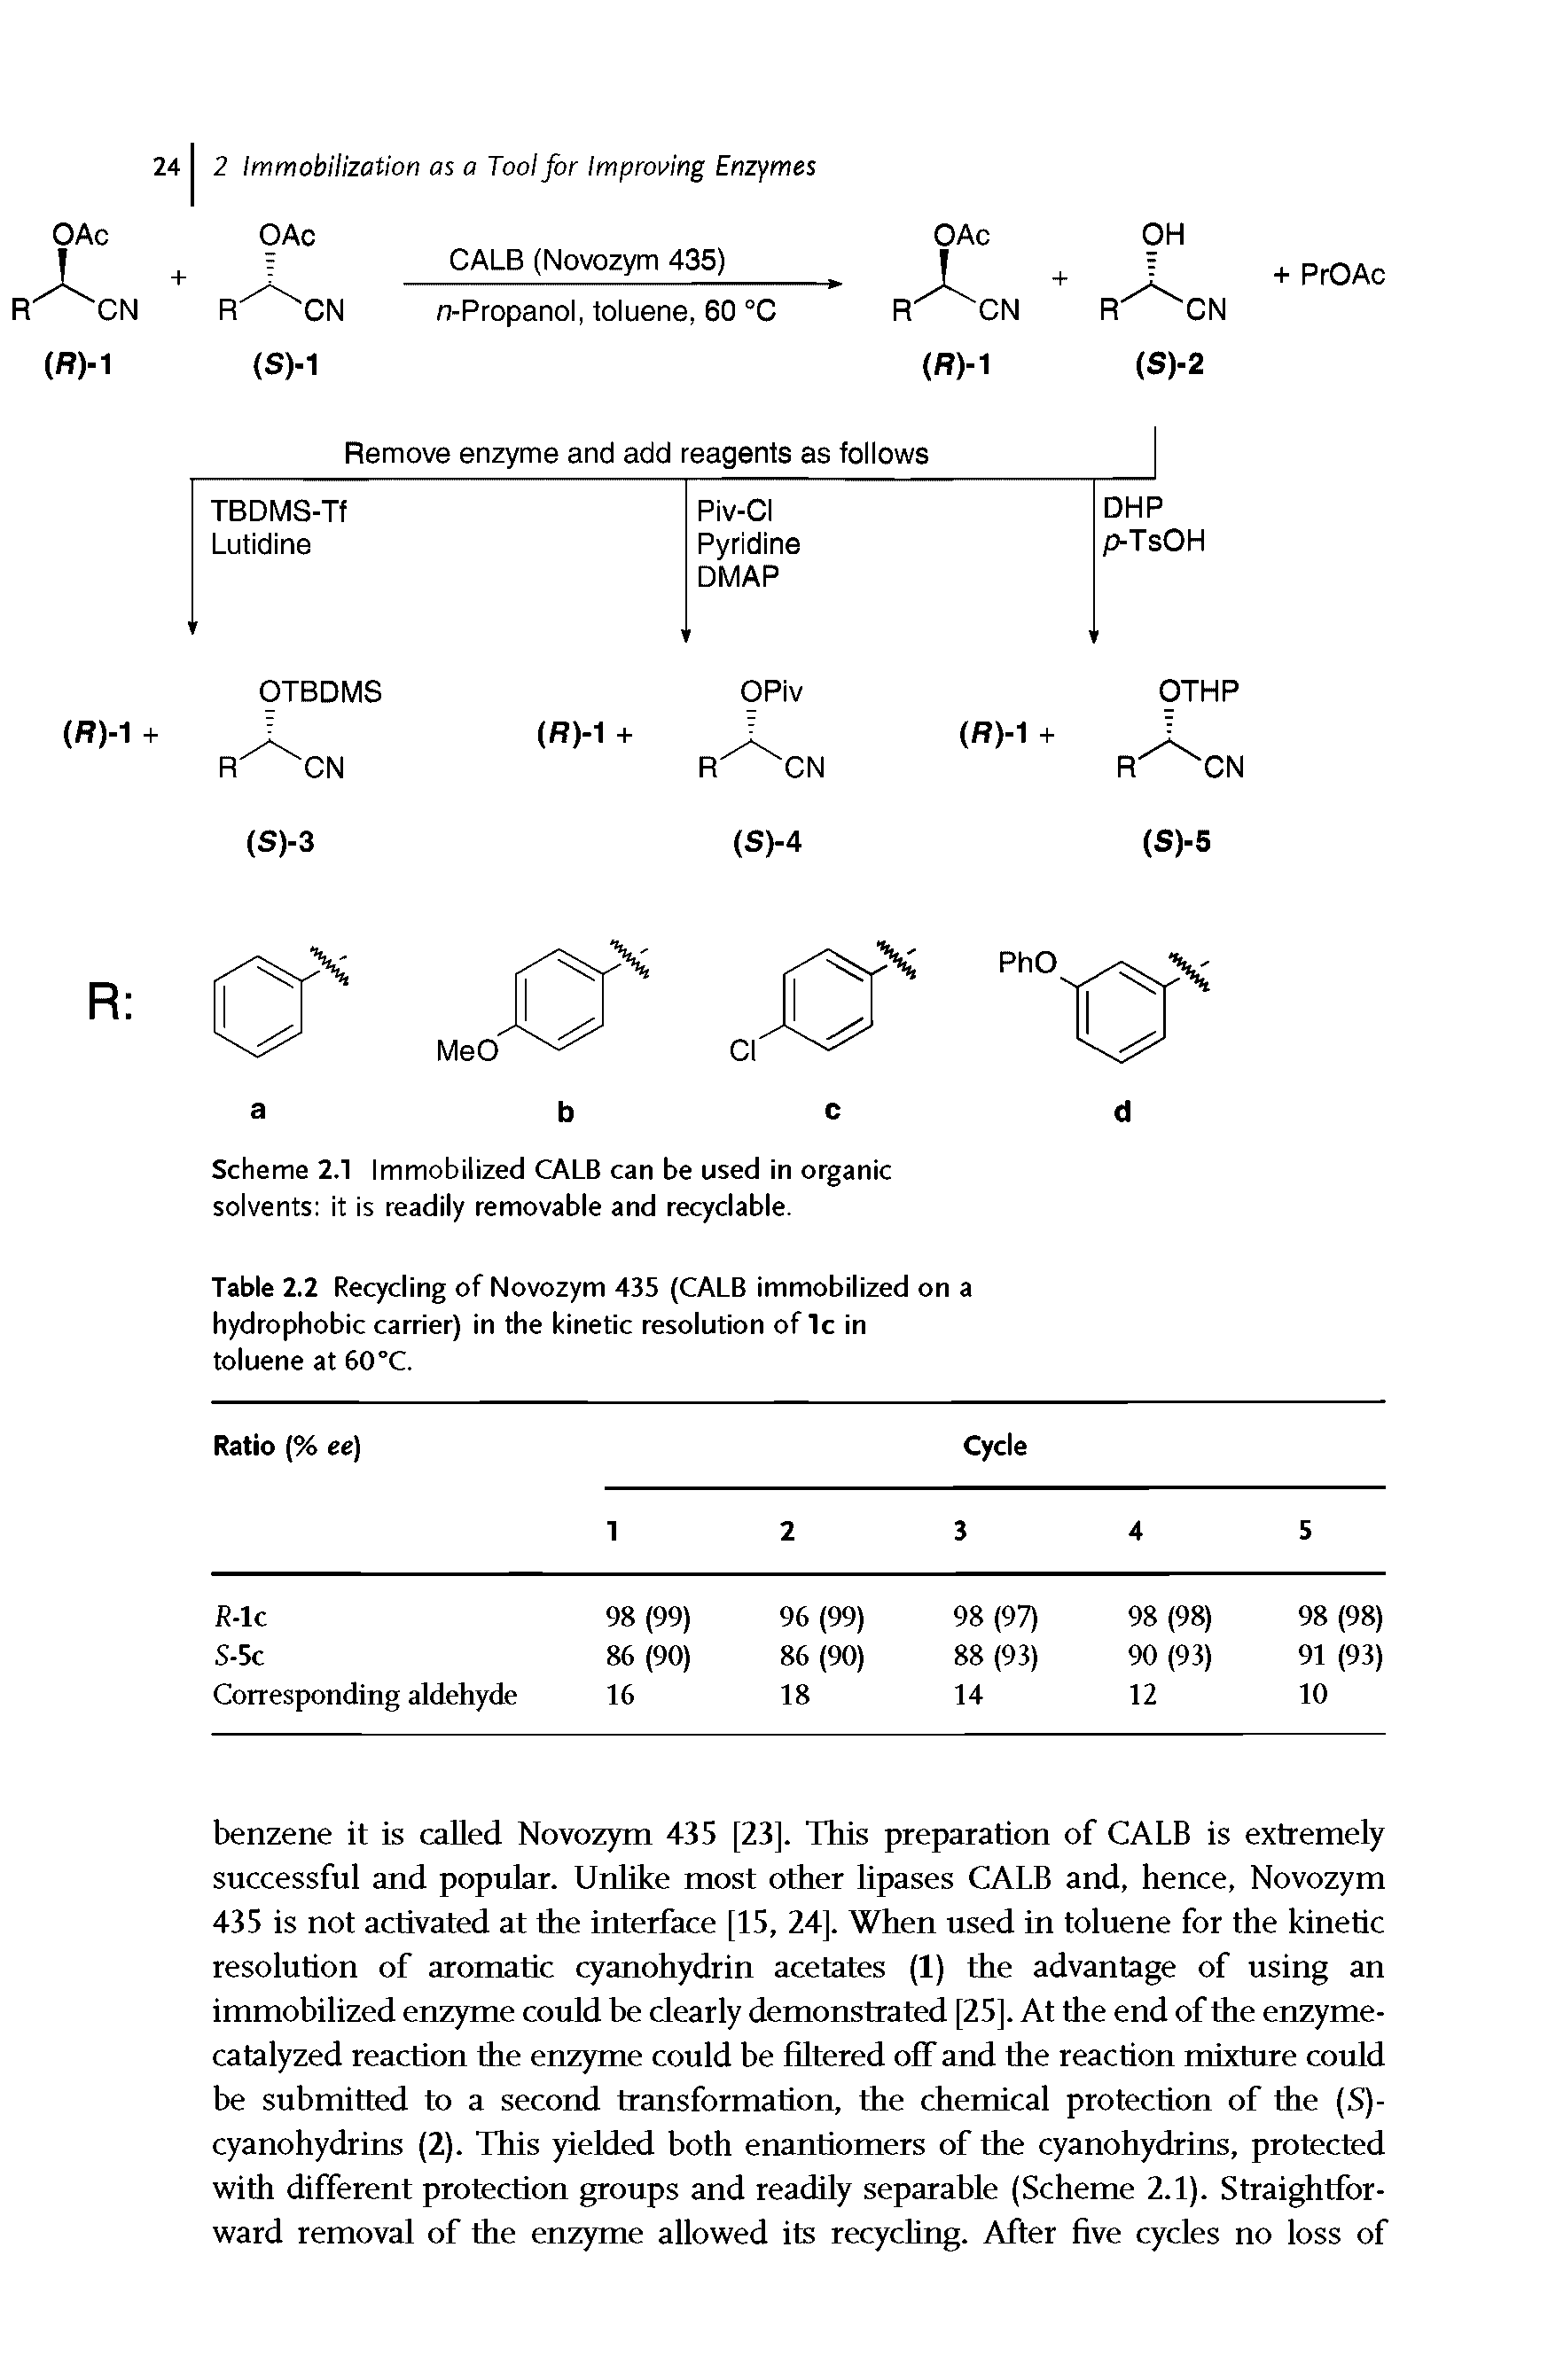 Table 2.2 Recycling of Novozym 435 (CALB immobilized on a hydrophobic carrier) in the kinetic resolution of 1c in toluene at 60°C.